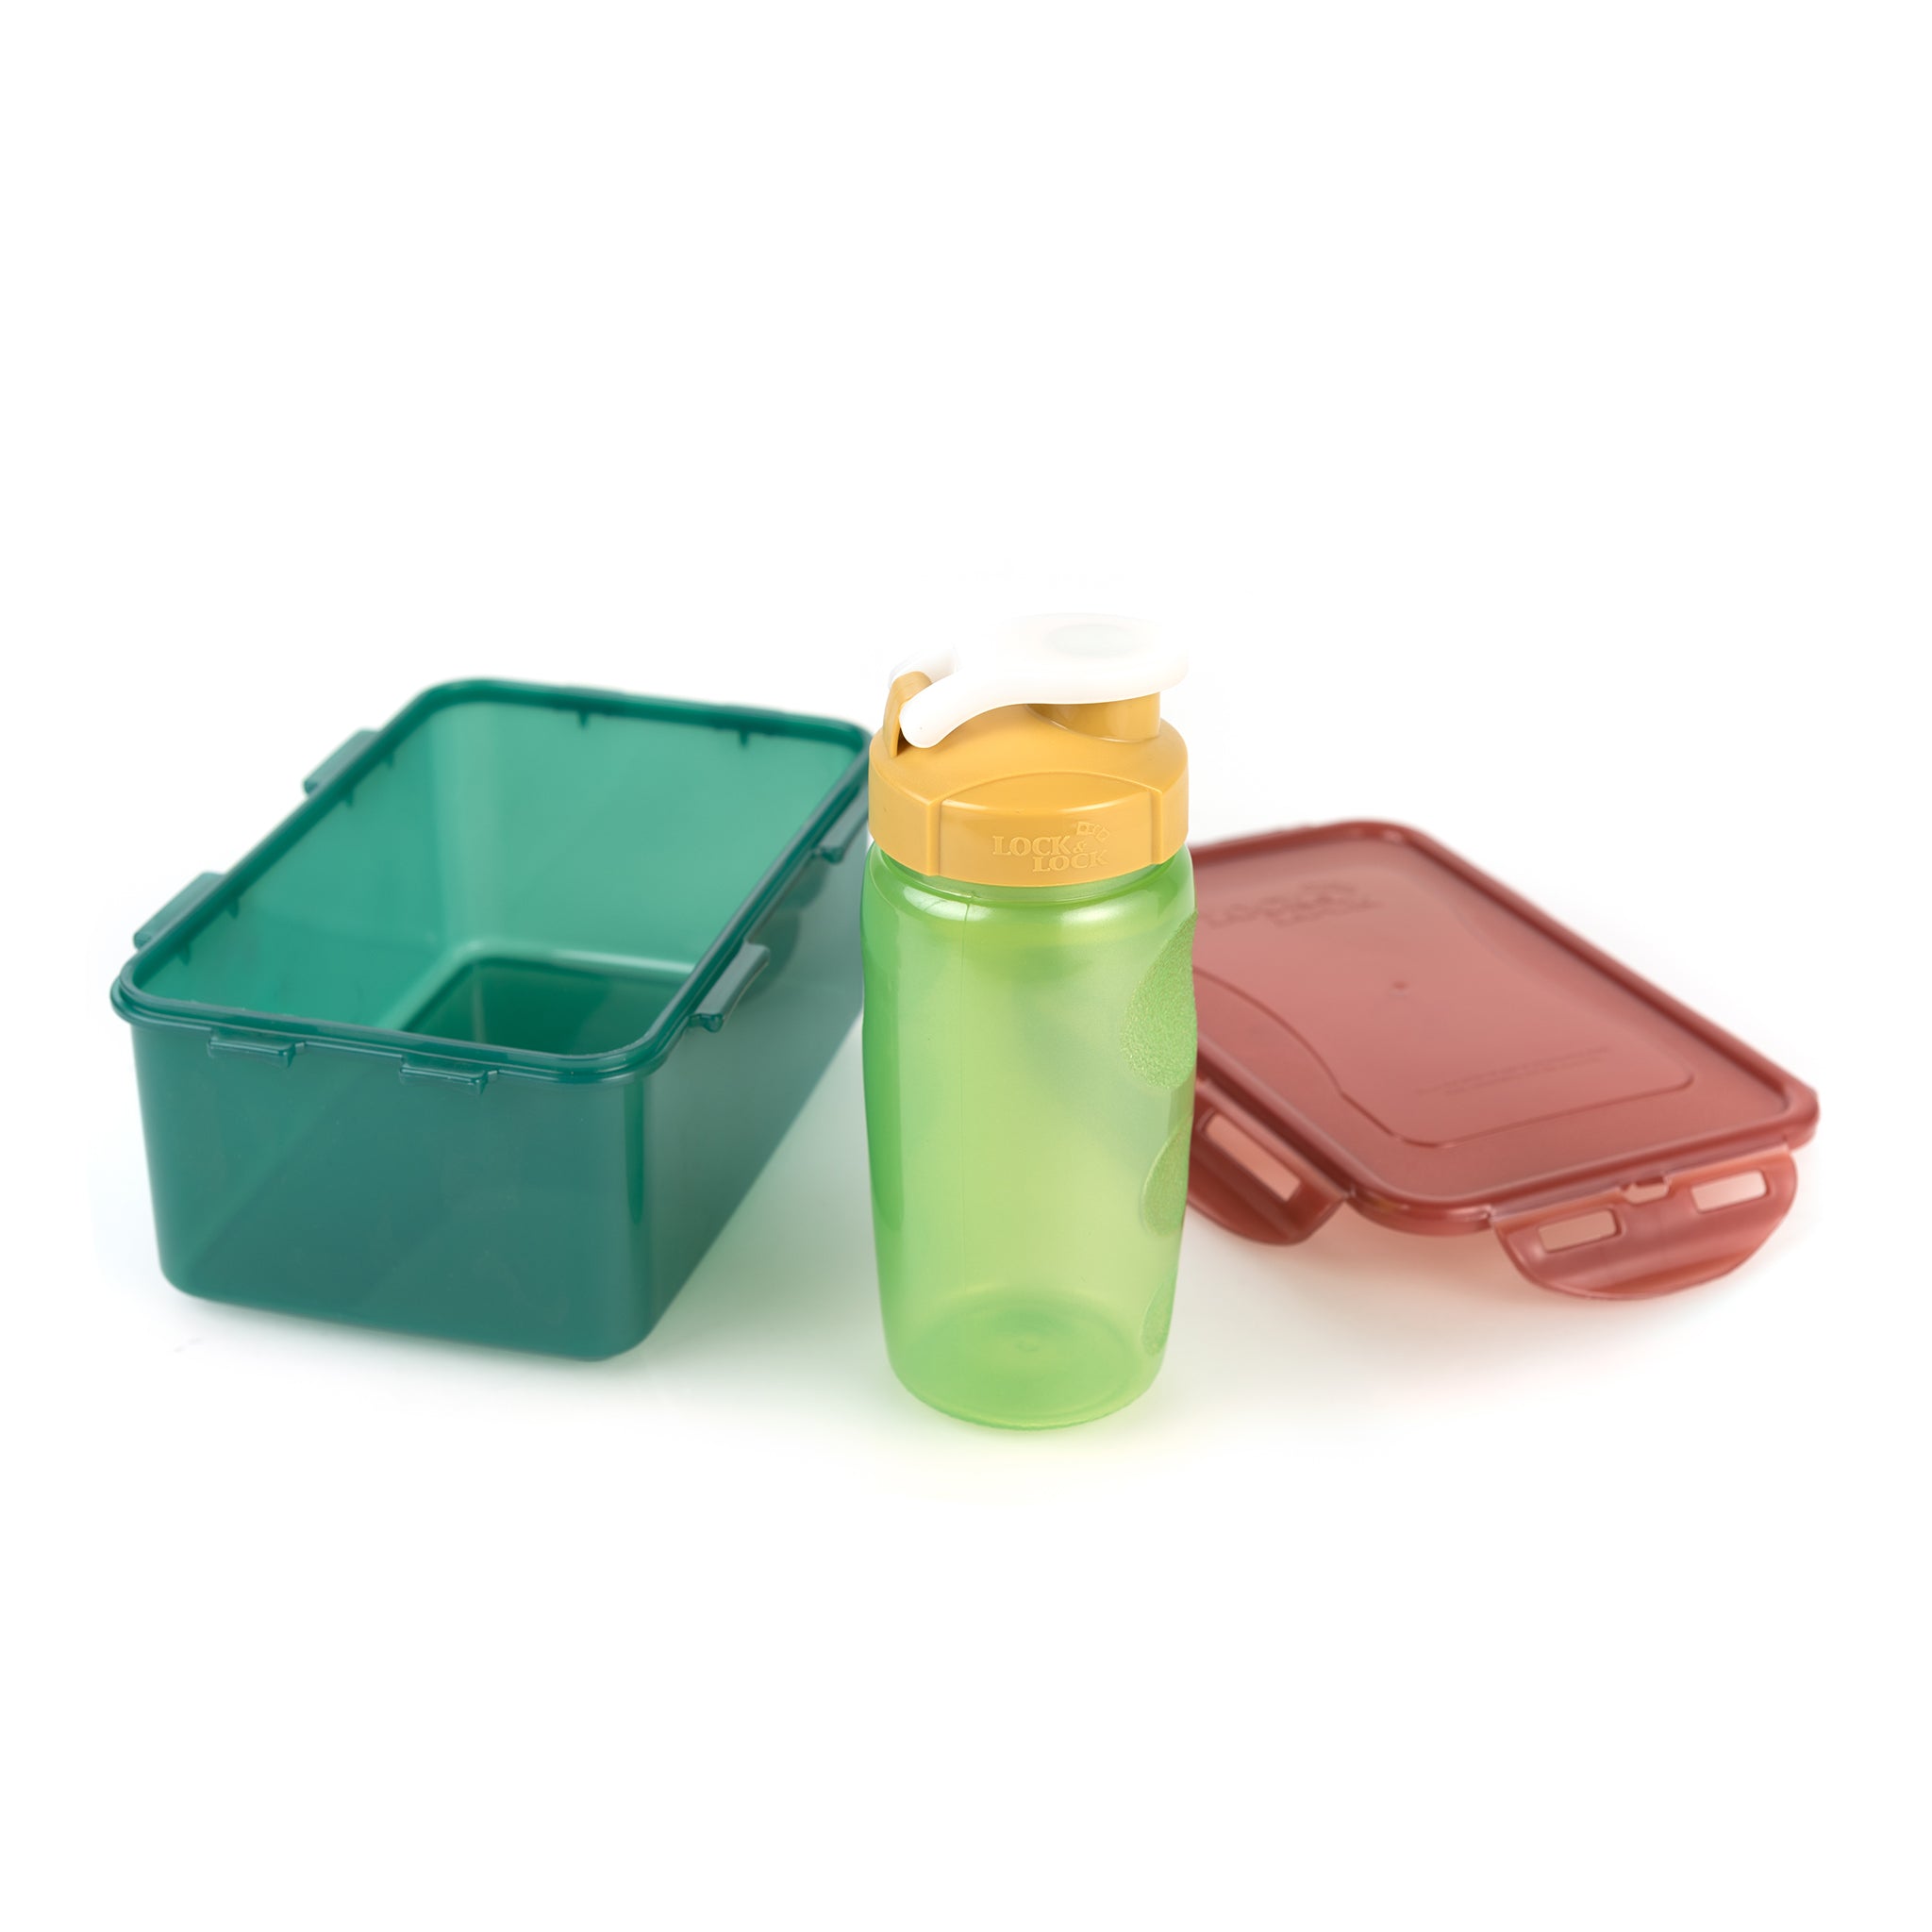 recycled plastic lunch box and recycled plastic water bottle